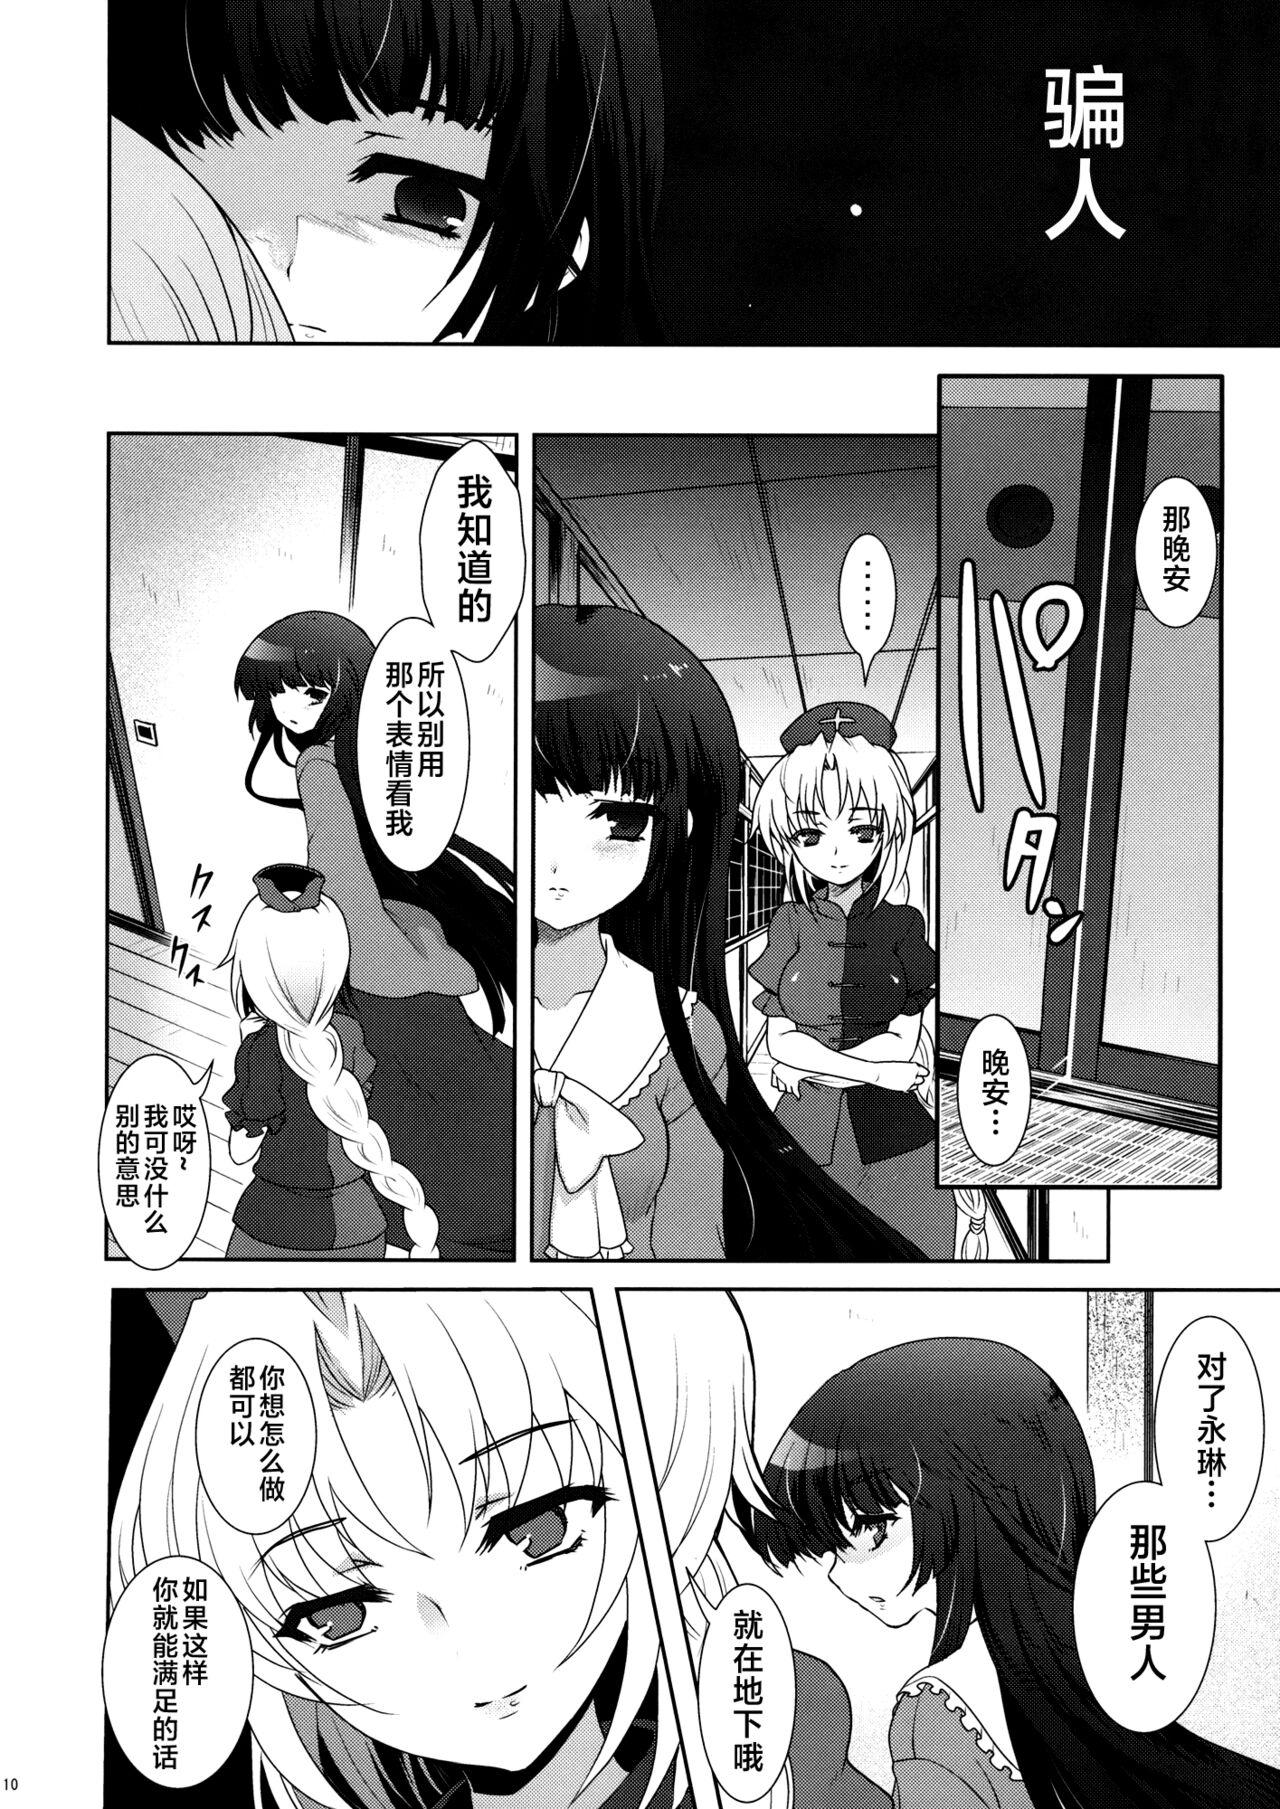 Vibrator Scapegoat Act: 2 - Touhou project Daring - Page 10